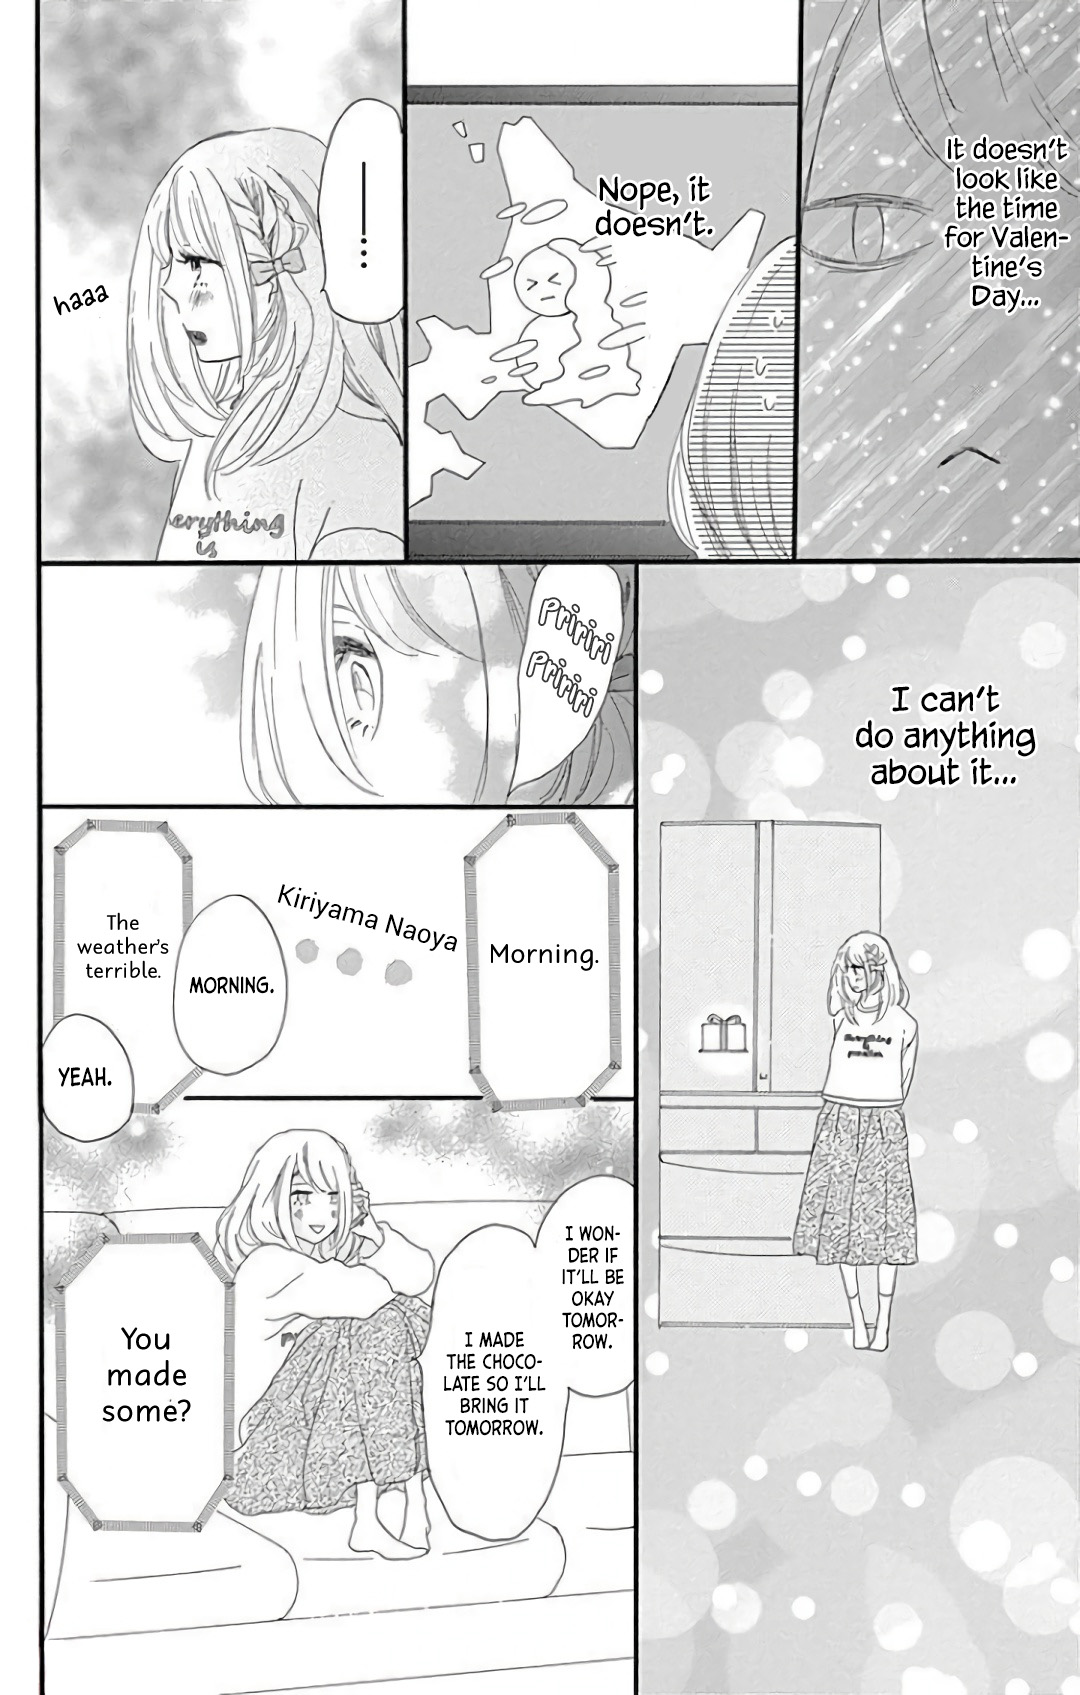 Where's My Lovely Sweetheart? Vol.5 Chapter 20